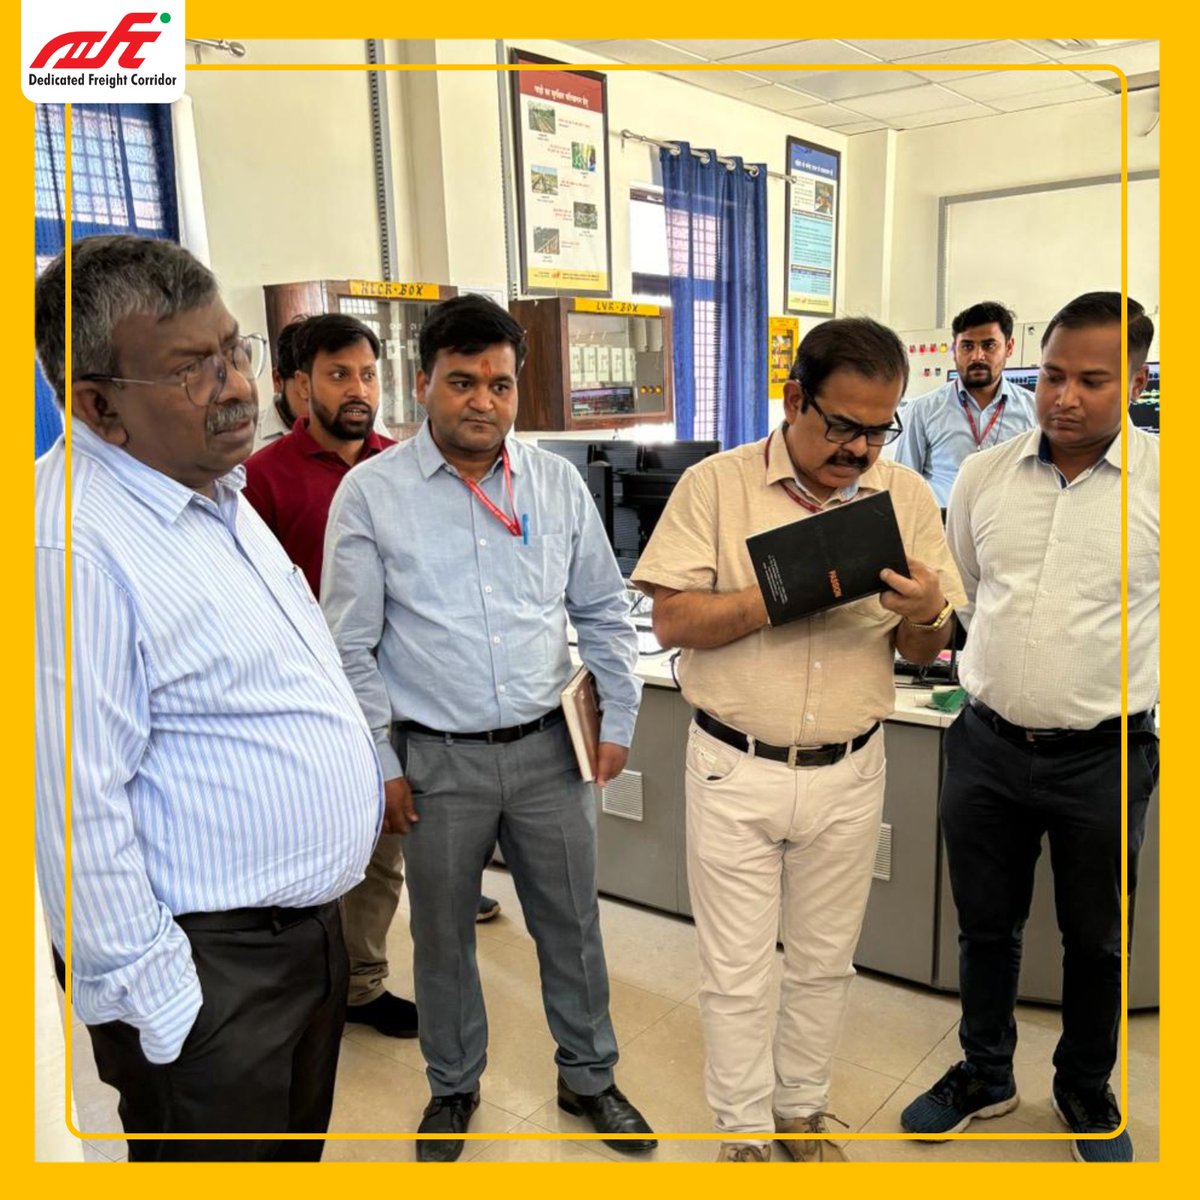 Shri Shobhit Bhatnagar, Director OP&BD conducted a thorough inspection of New Manauri Station, focusing on safety, alertness, business development (GCT), and IT infrastructure (DFIS, TMS). Ensuring excellence across all fronts for a seamless operation. #DFCCIL #GameChanger